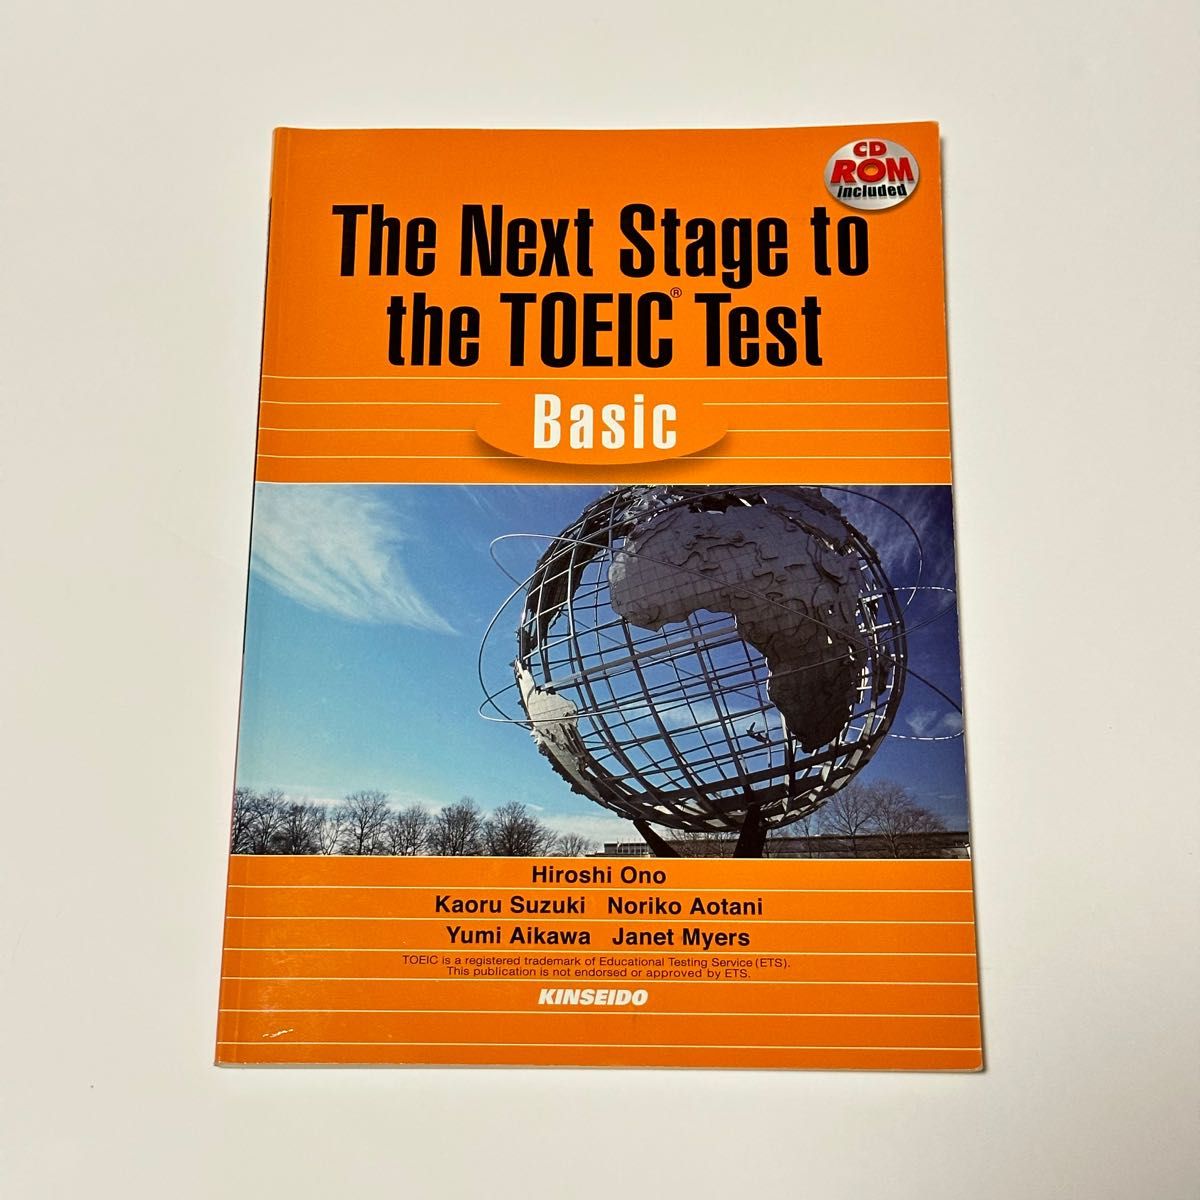 The Next Stage to the TOEIC Test Basic